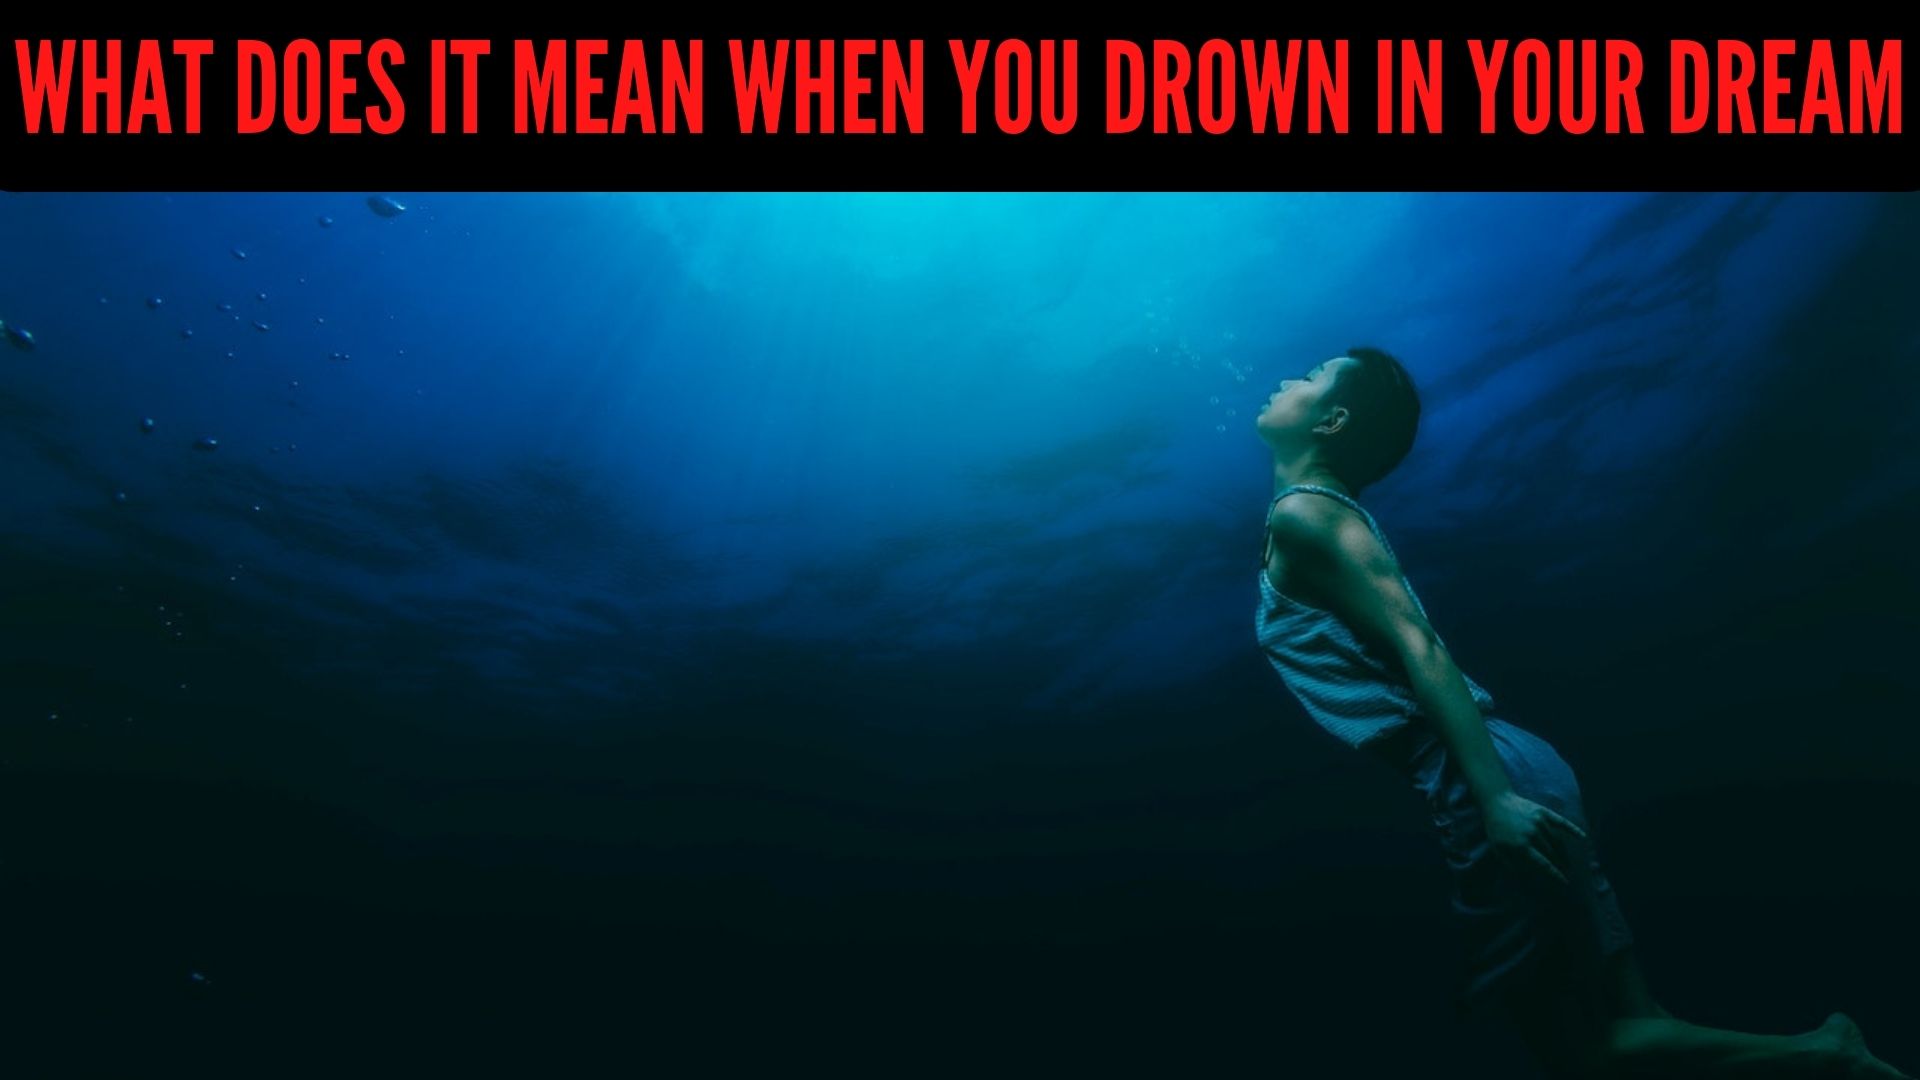 What Does It Mean When You Drown In Your Dream?